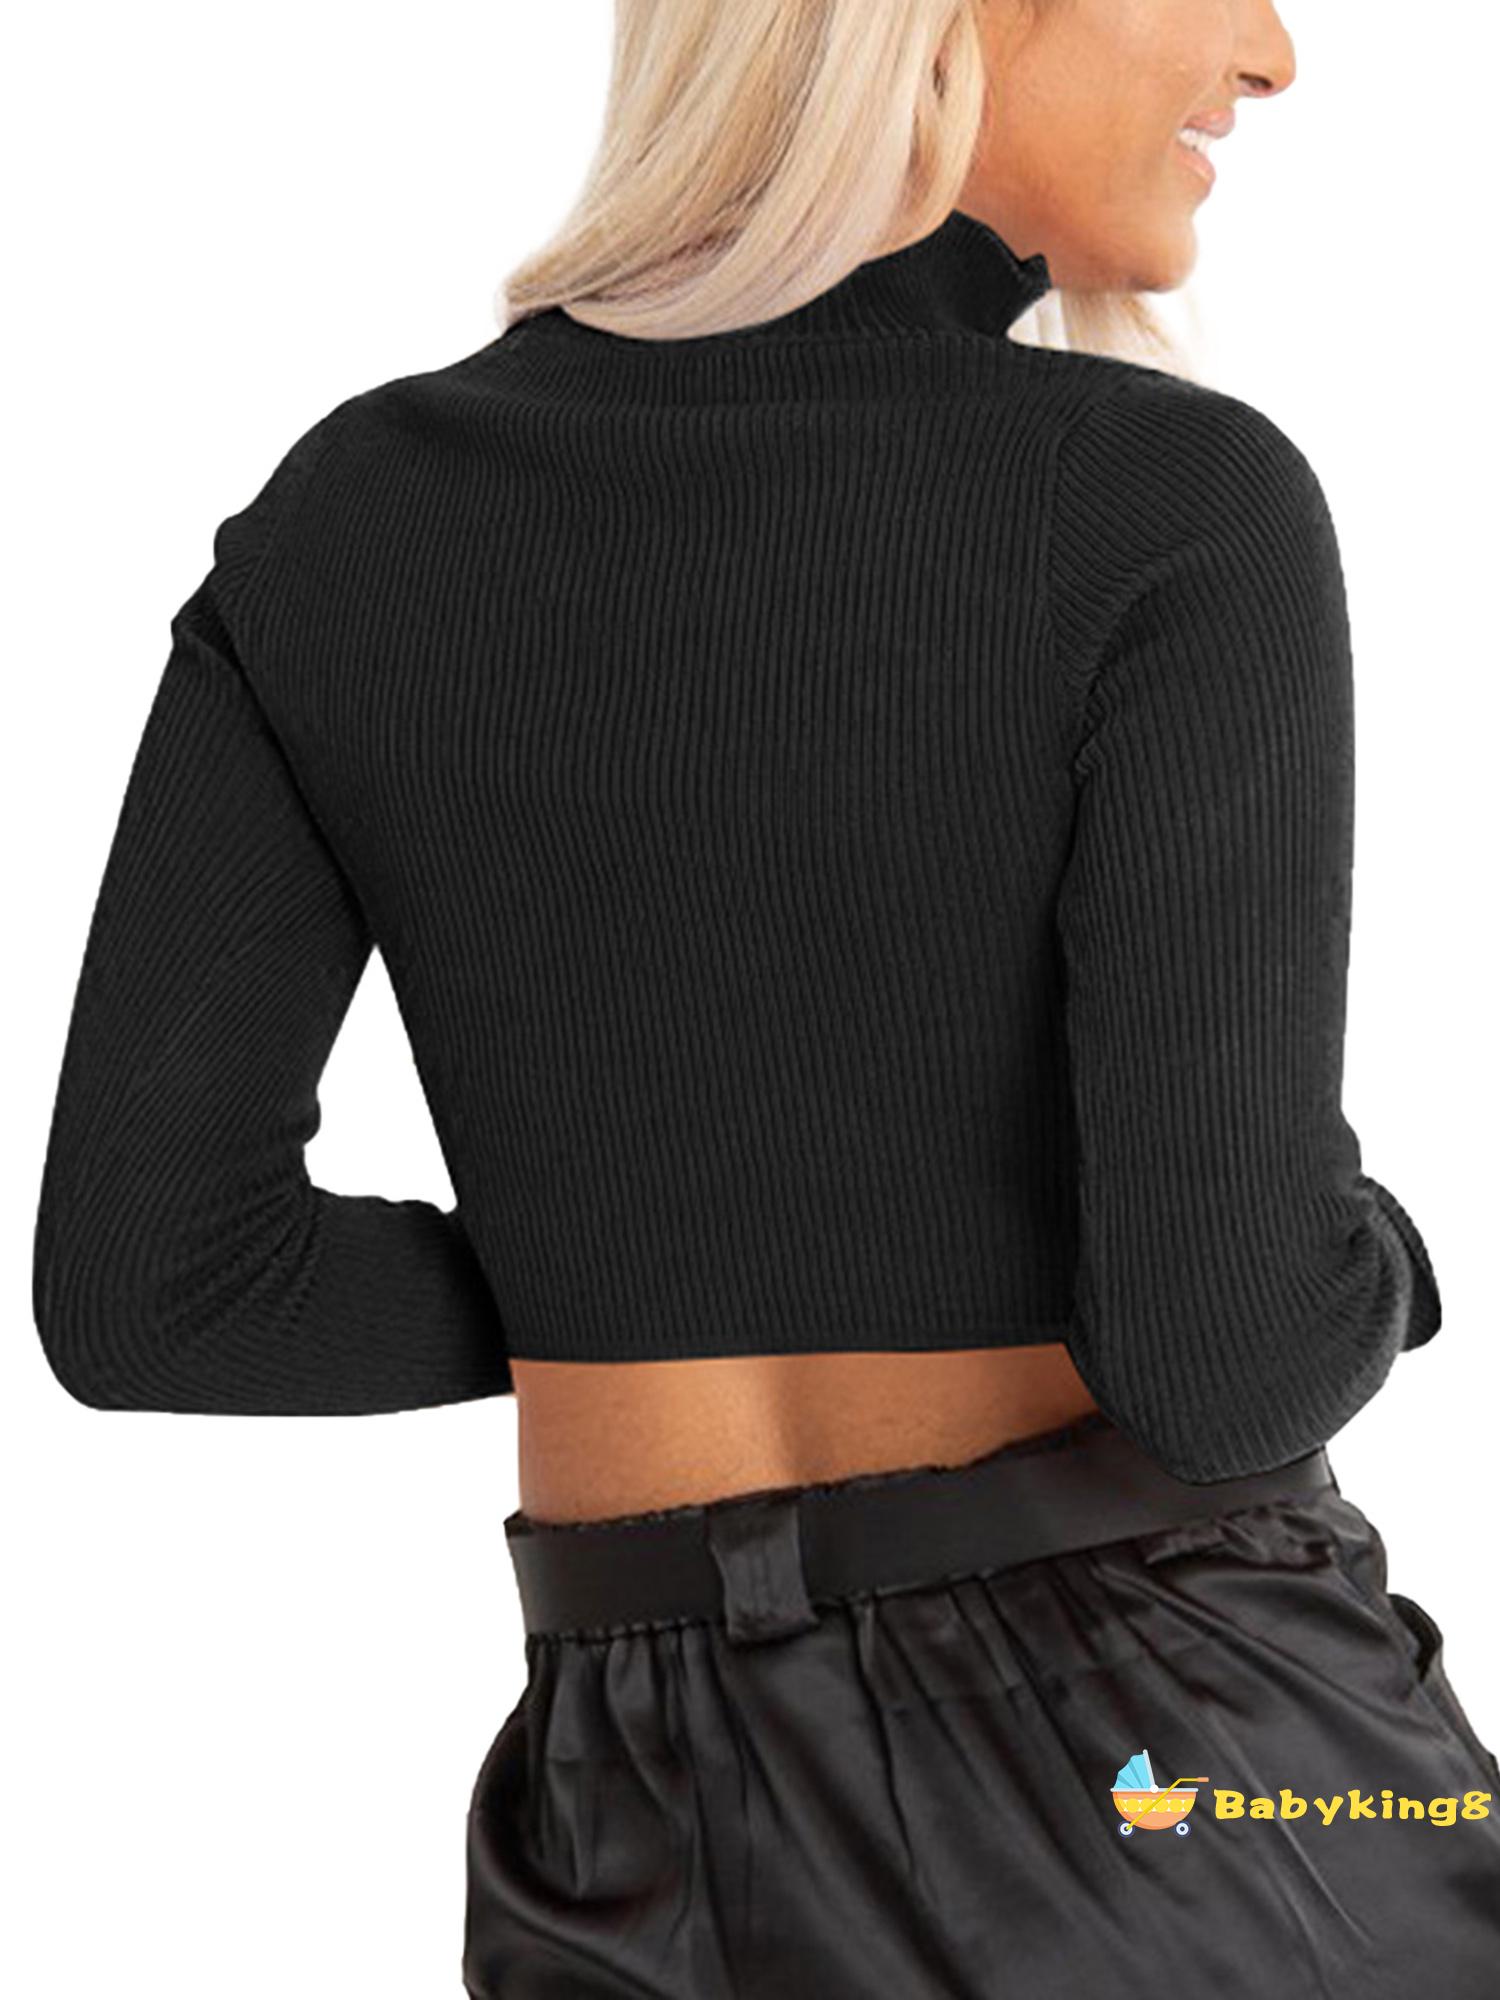 MICDROP-Women´s Rib Knit Crop Top Long Sleeve Stand Collar Zipper Front Slim Fit Solid Color Basic Tee Shirt